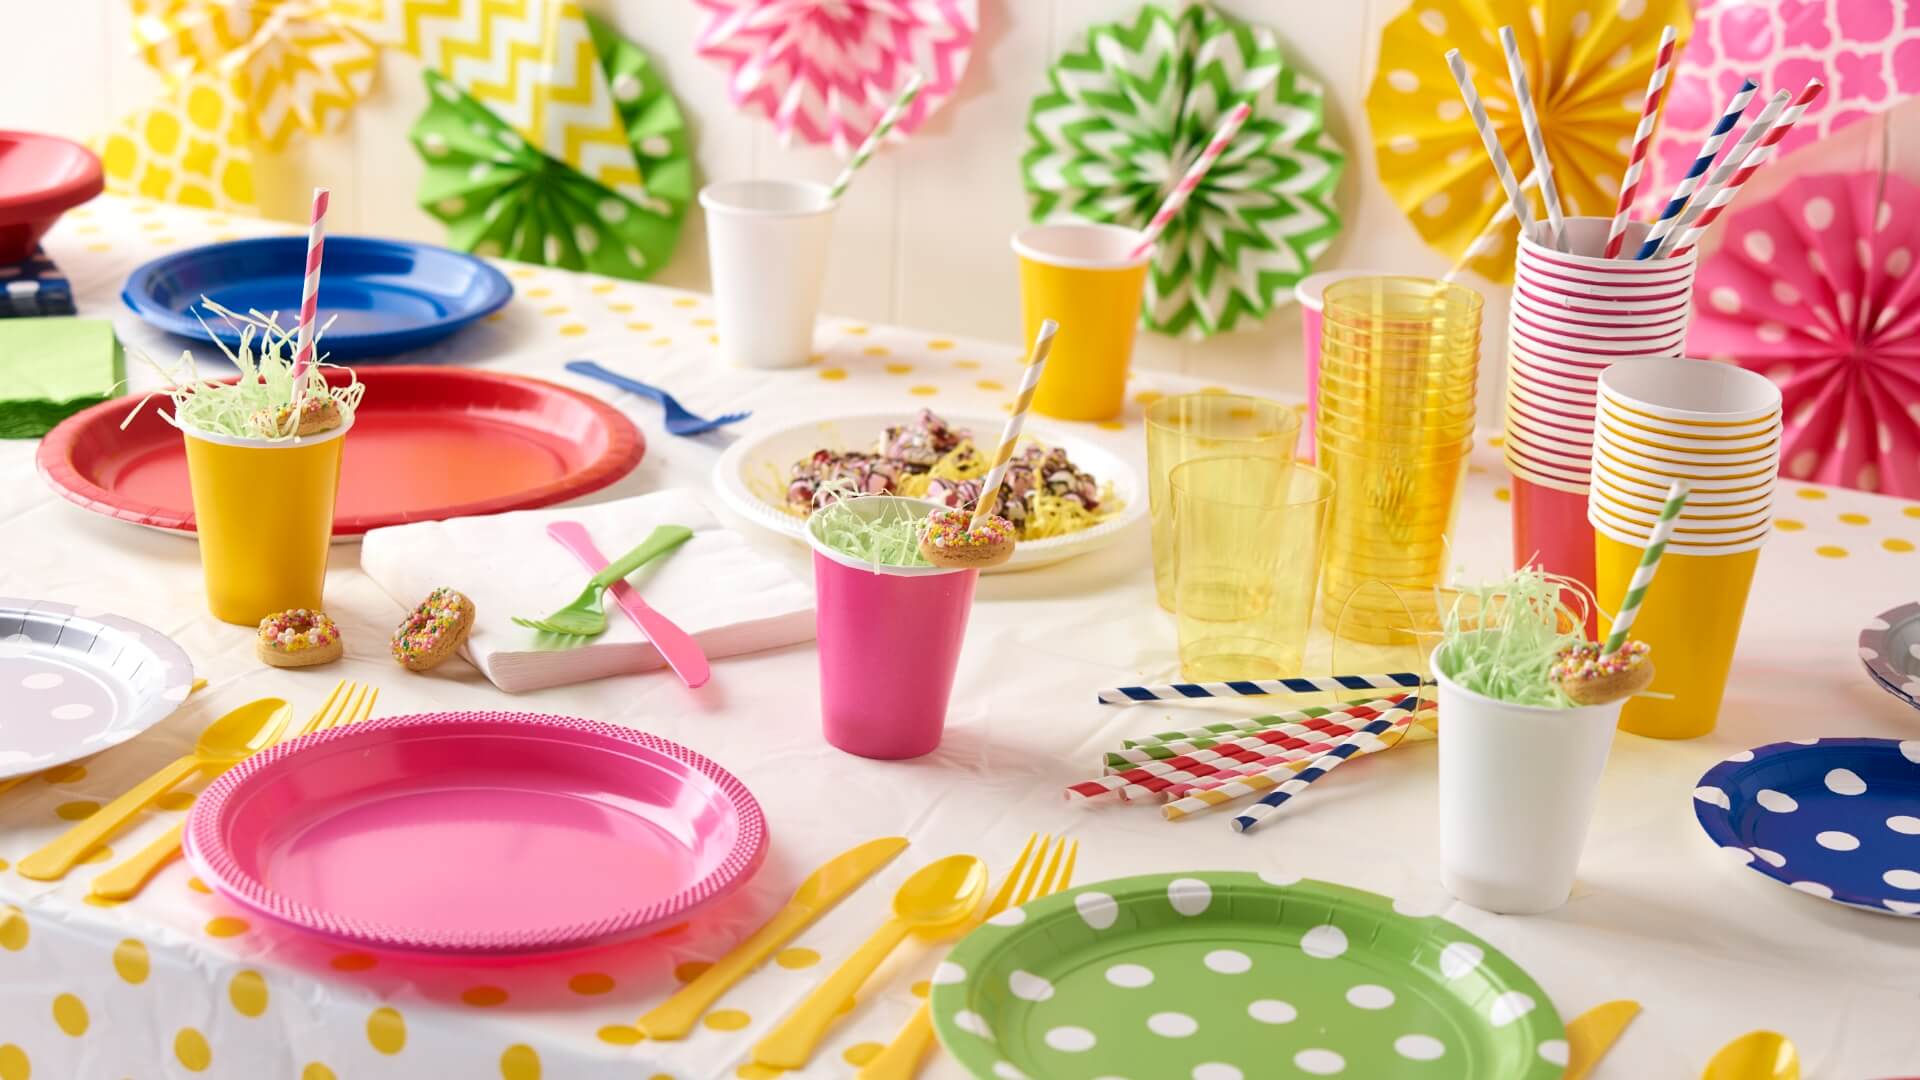 Choosing Party Tableware For Events & Celebrations